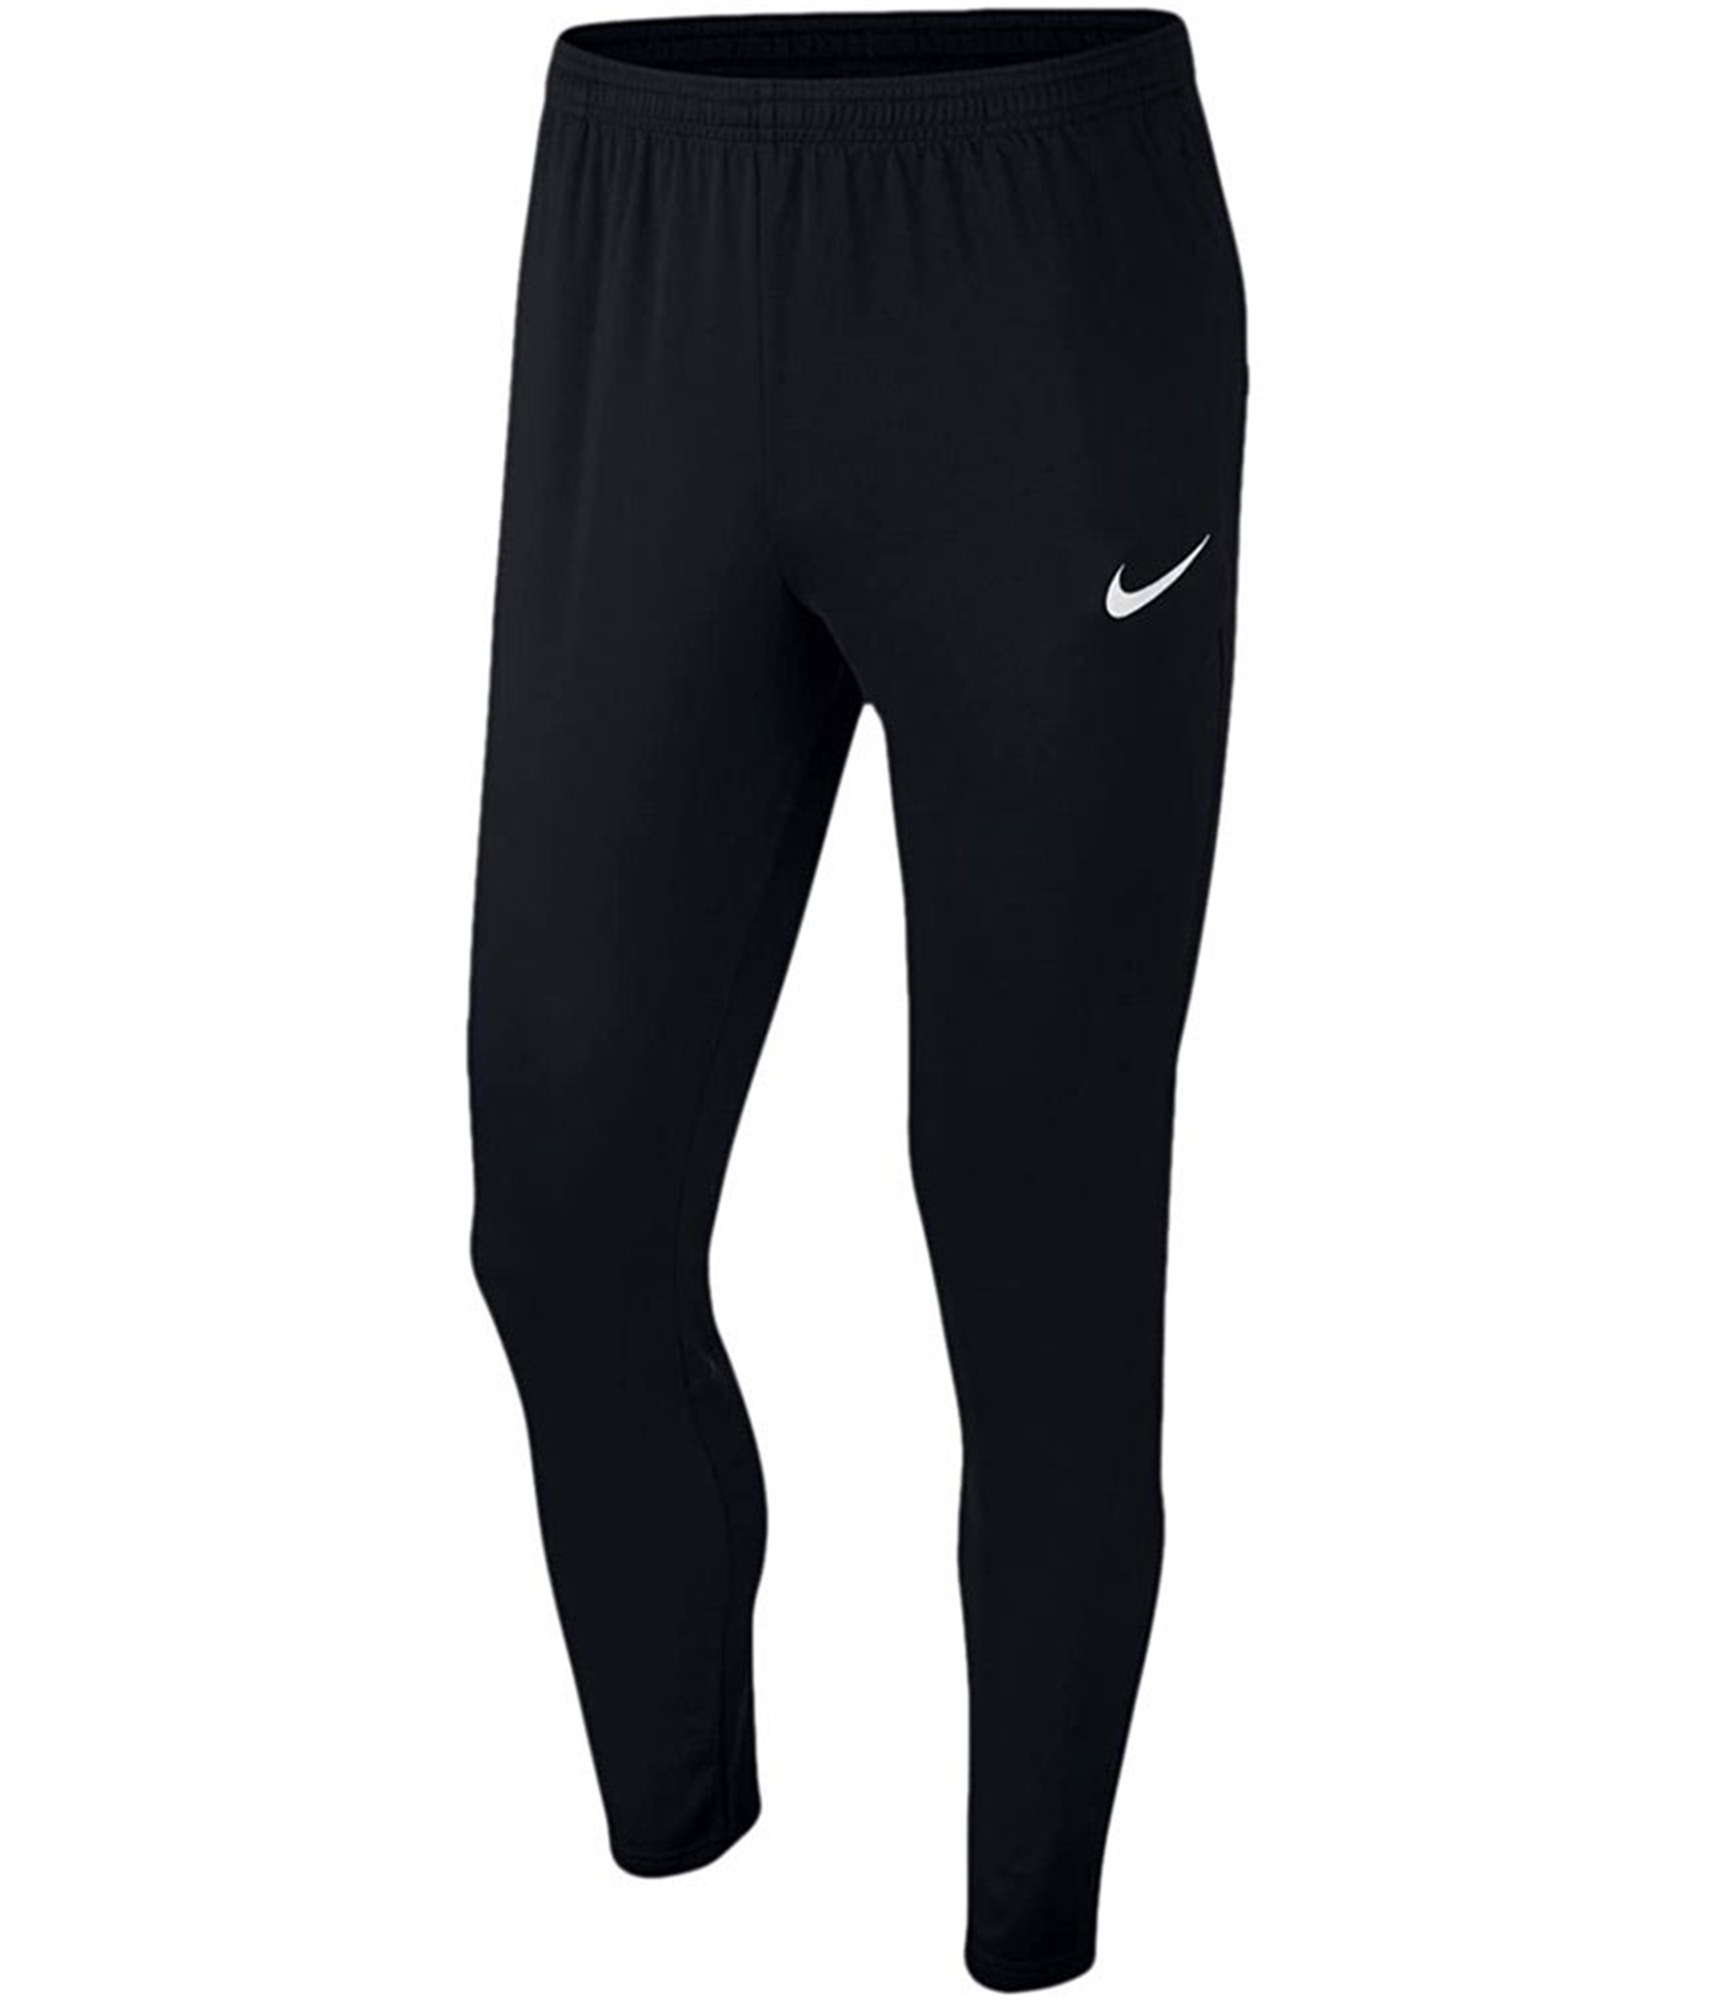 Buy a Boys Nike Academy 18 Soccer Athletic Jogger Online | TagsWeekly.com